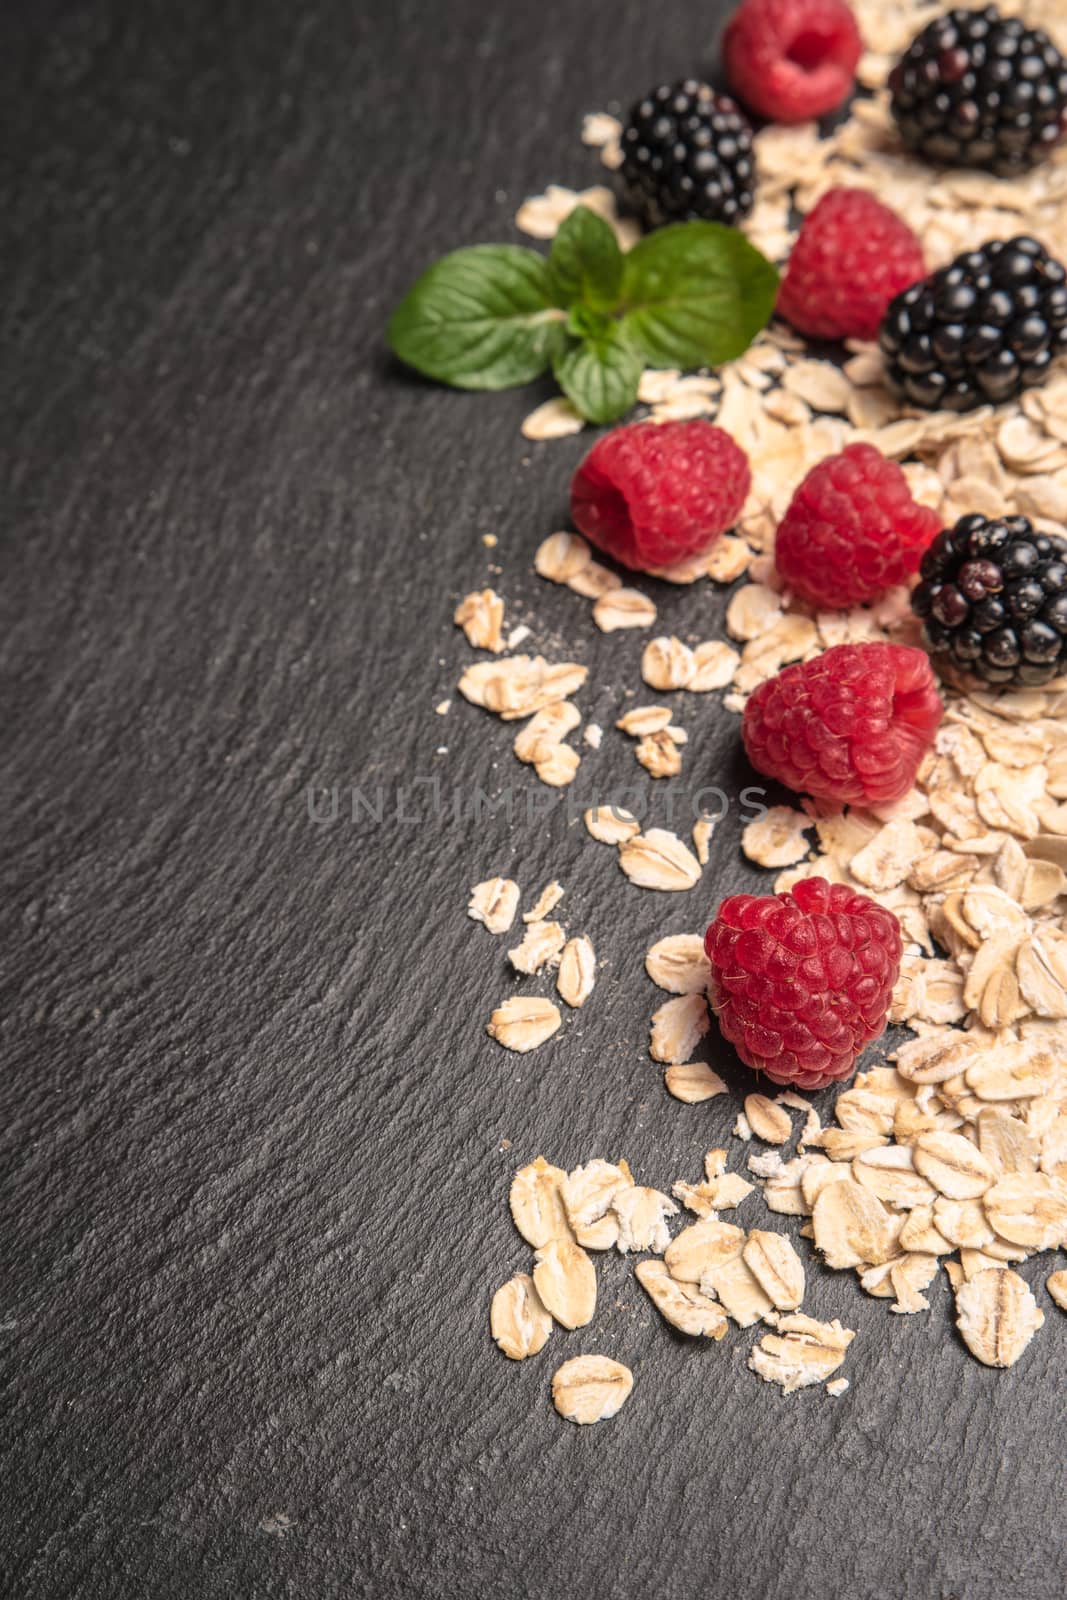 Healthy breakfast and berries on slate background, close-up by AnaMarques